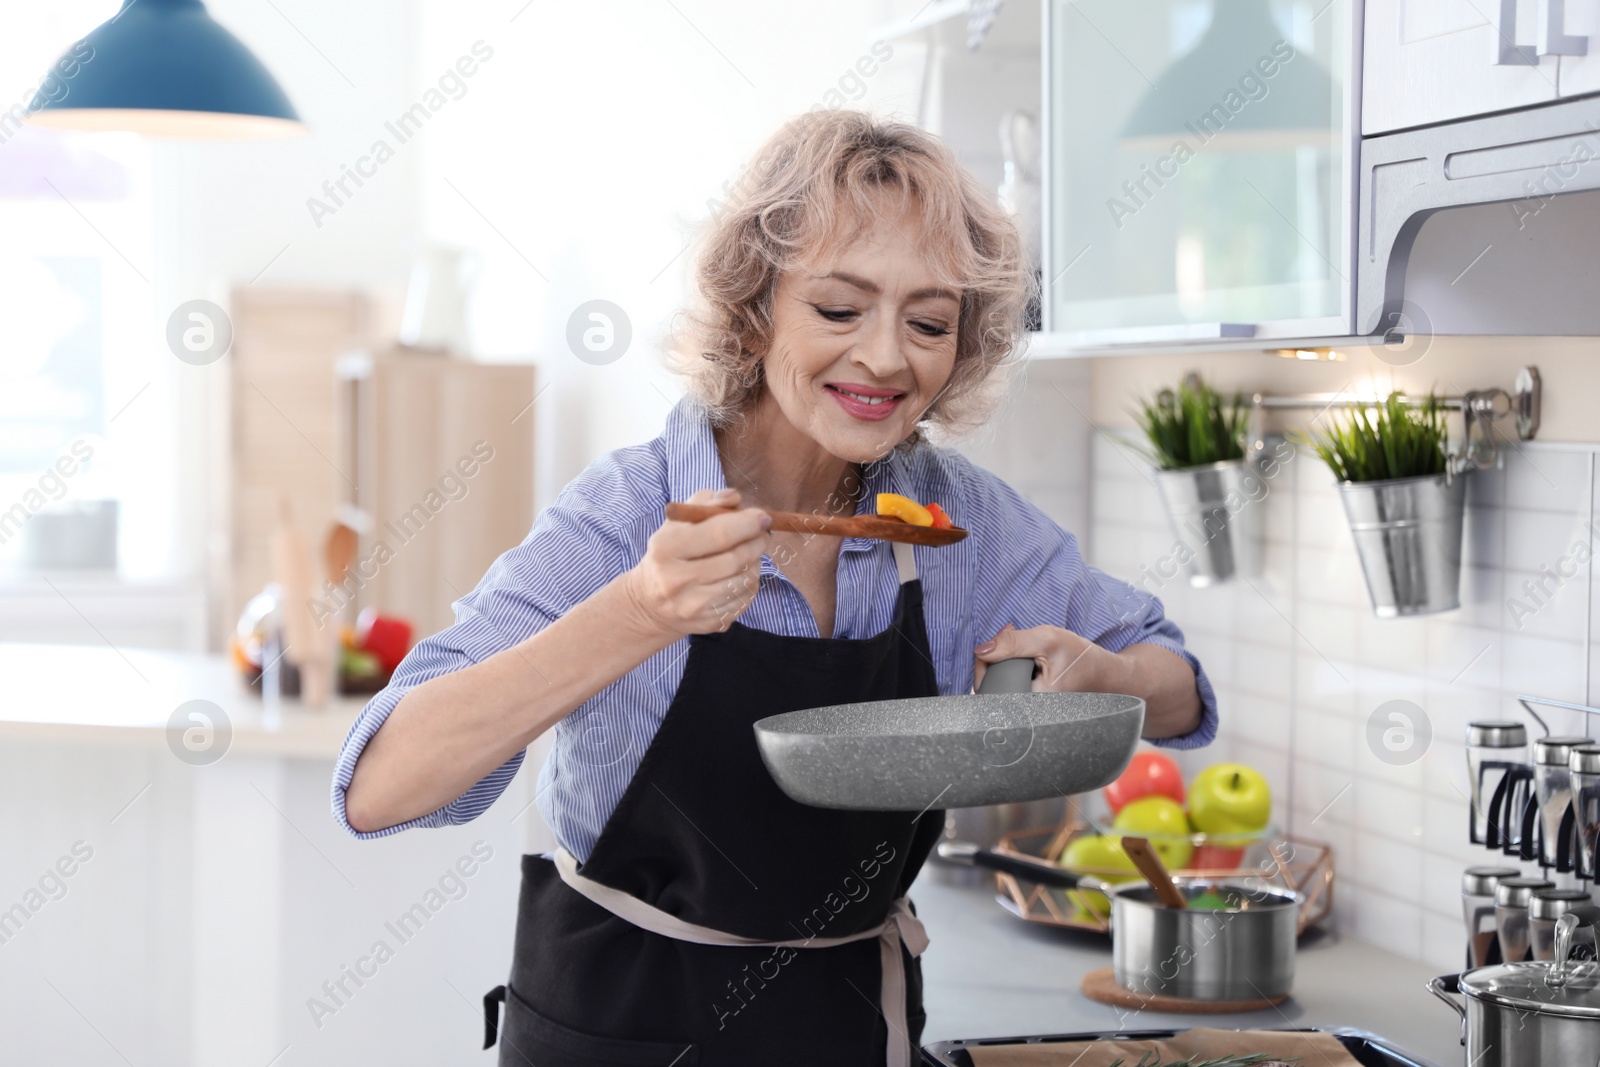 Photo of Professional female chef cooking vegetables in kitchen